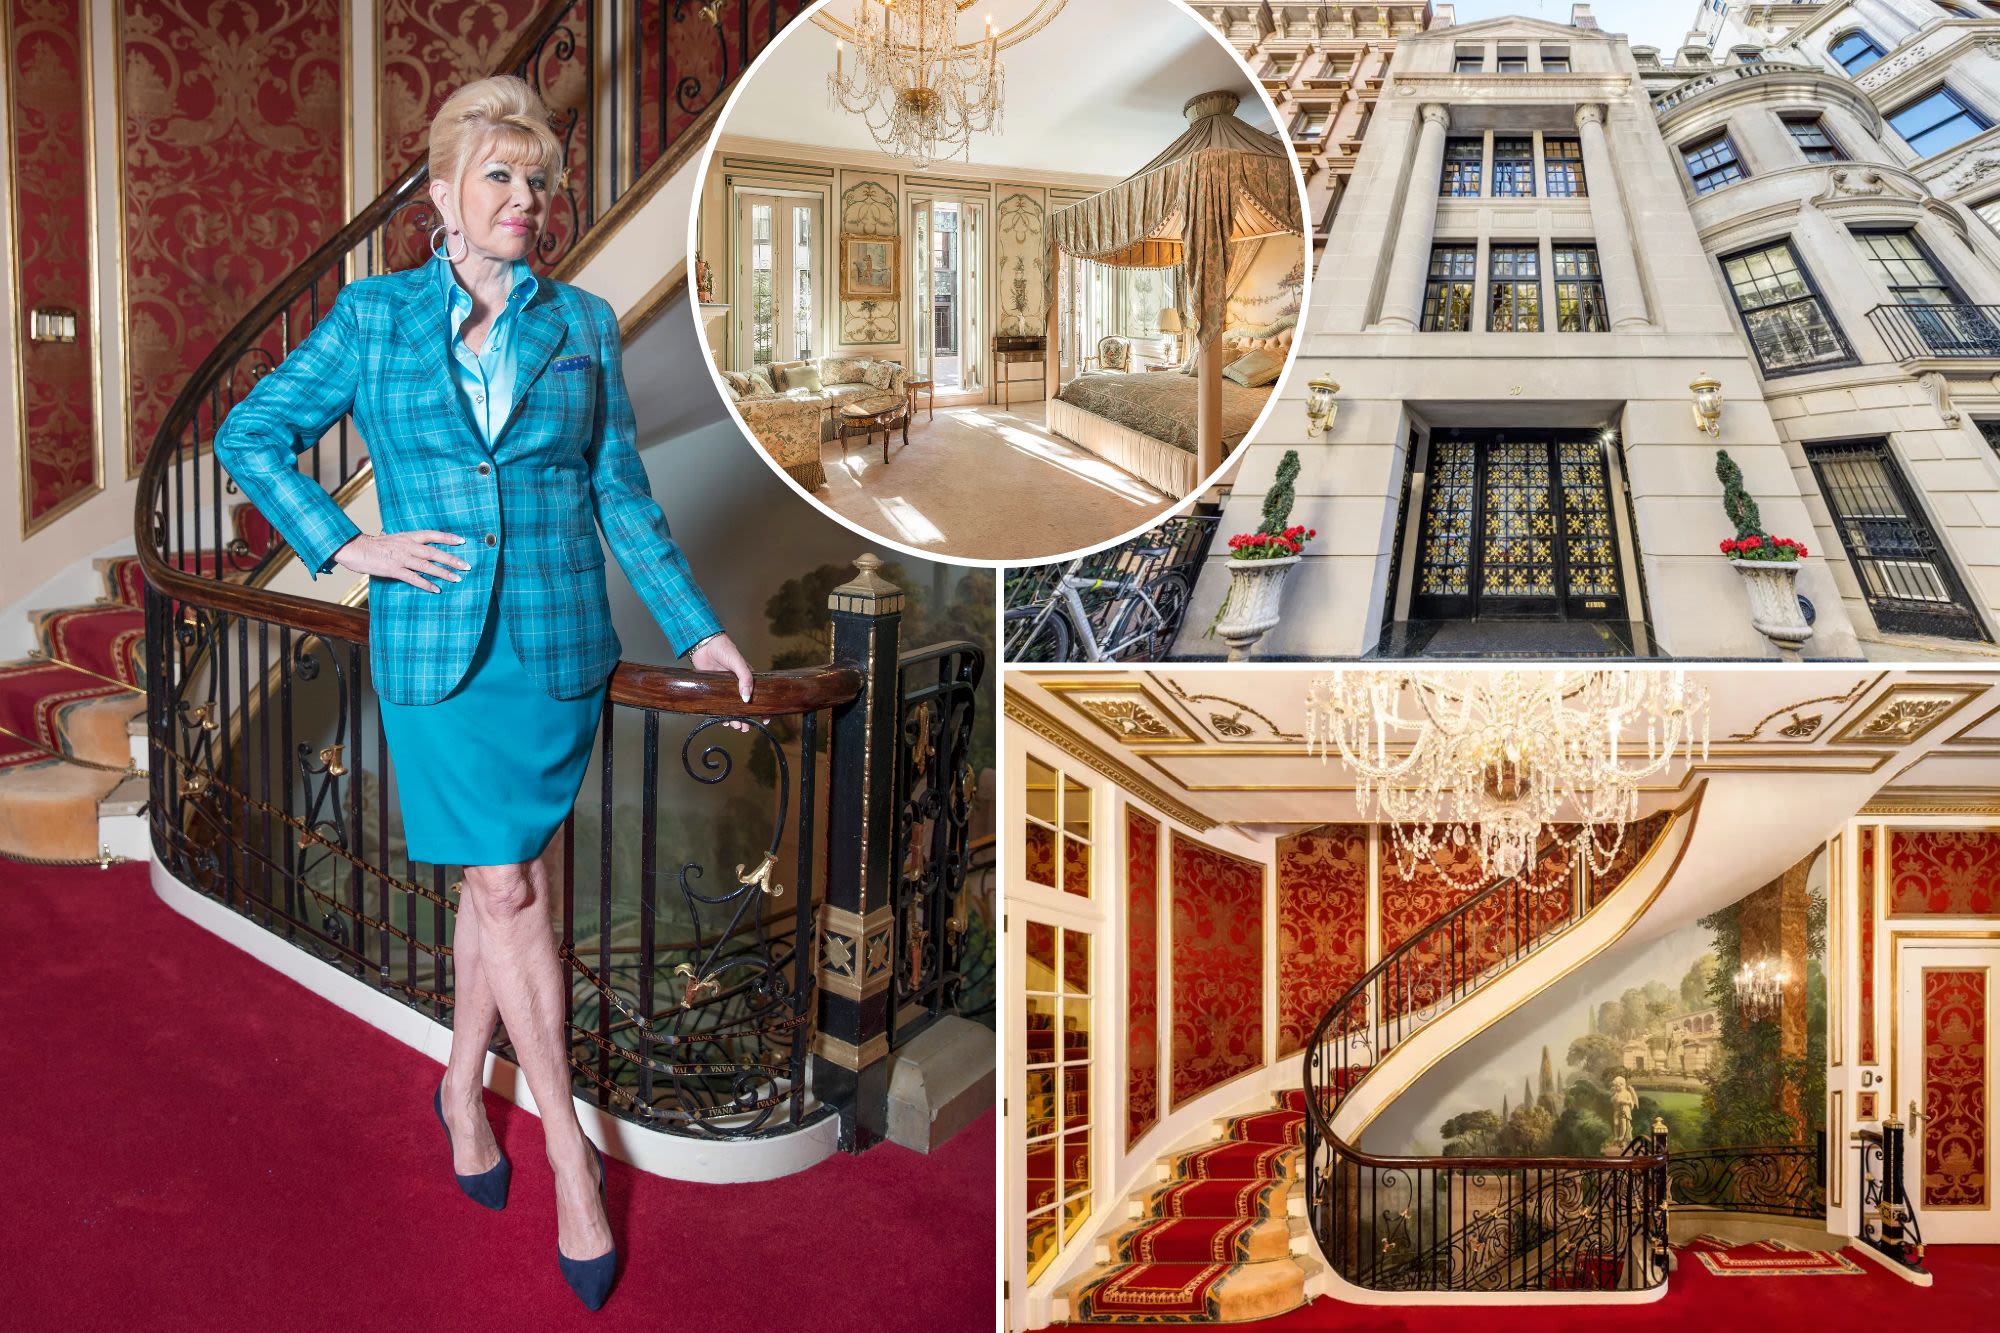 Ivana Trump’s gilded NYC townhouse has now seen $7M slashed off its asking price after 2 years for sale